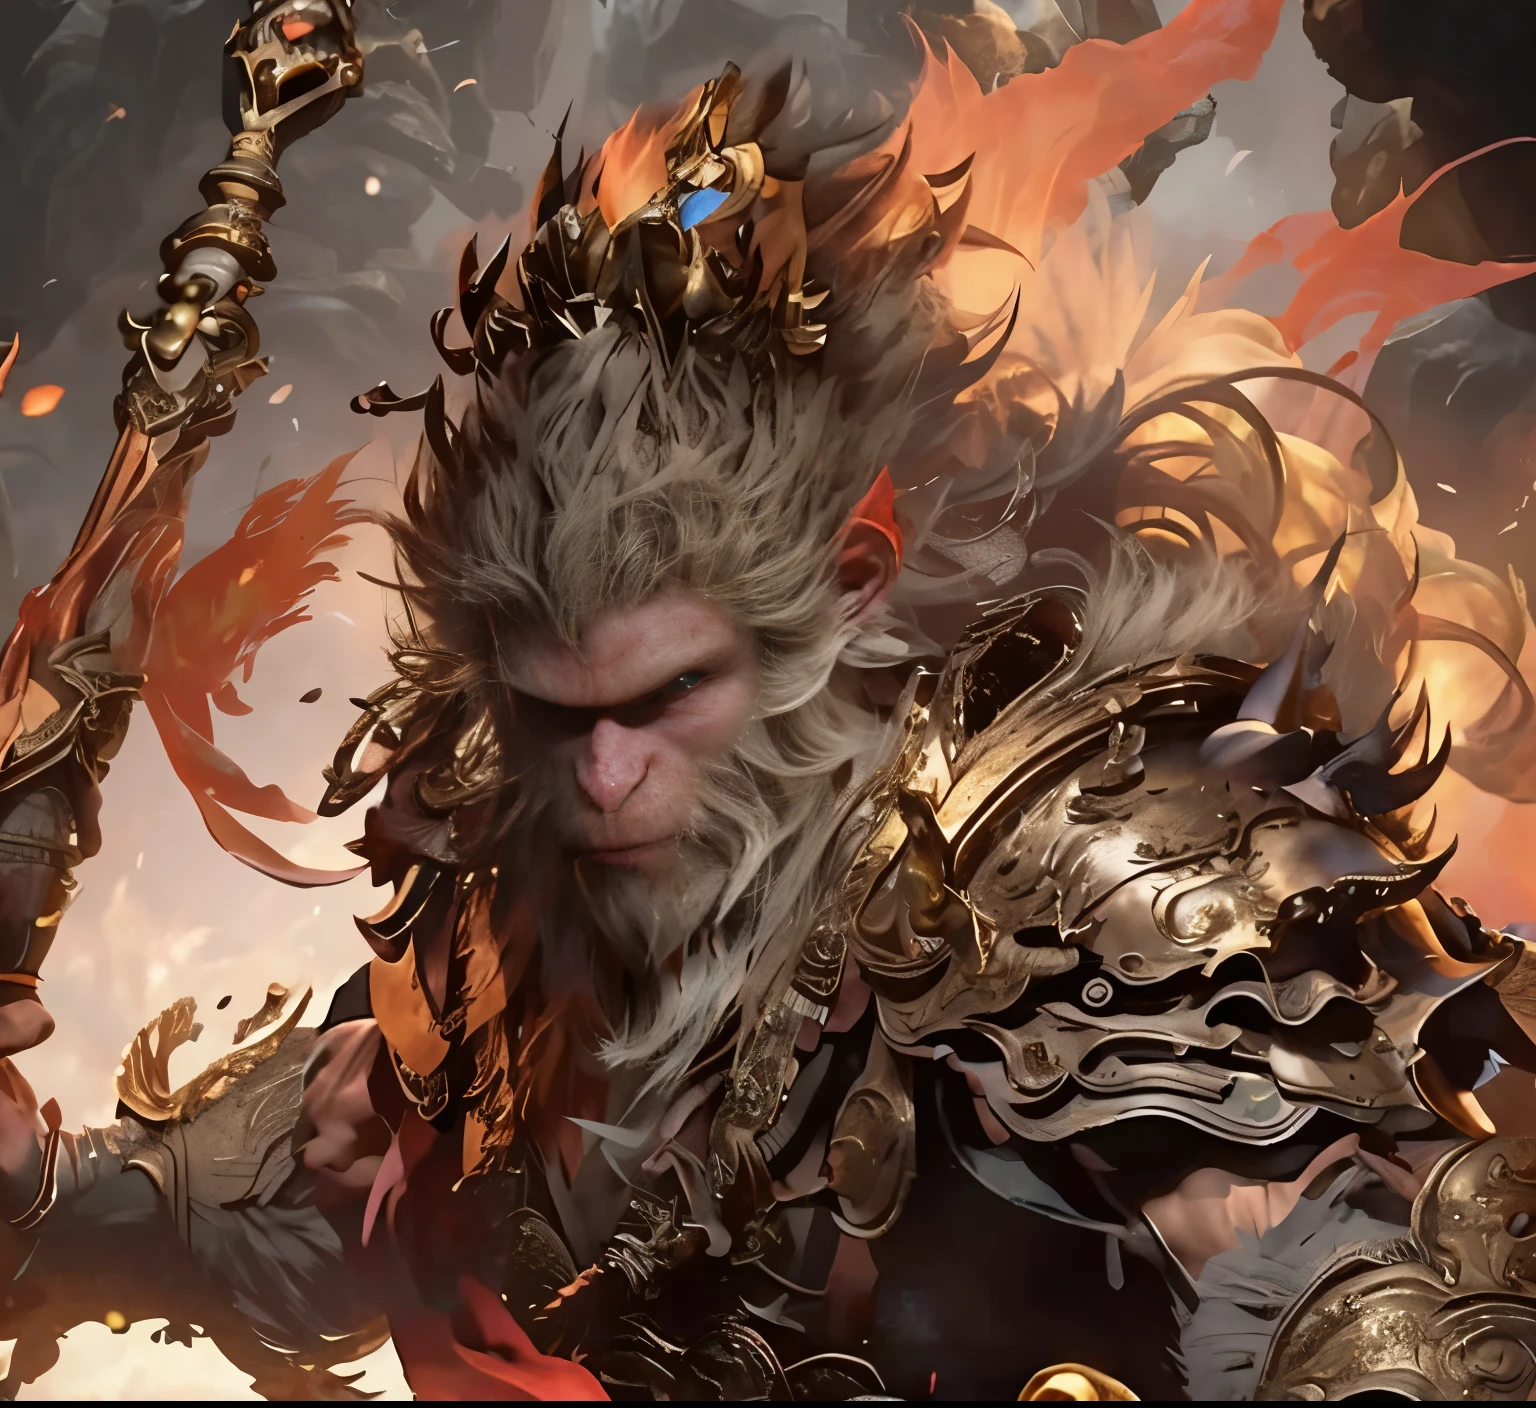 One with a sword on his head、Close-up of man wearing crown, Wukong, Sun Wukong, author：Hero, Monkey king, More, Wop and Rose Tran, ross tran (Ross Tran) and wlop, wop art, author：Yang Jin, drak, 《the original god》Keqing in, fire giant, author：Victor Wang